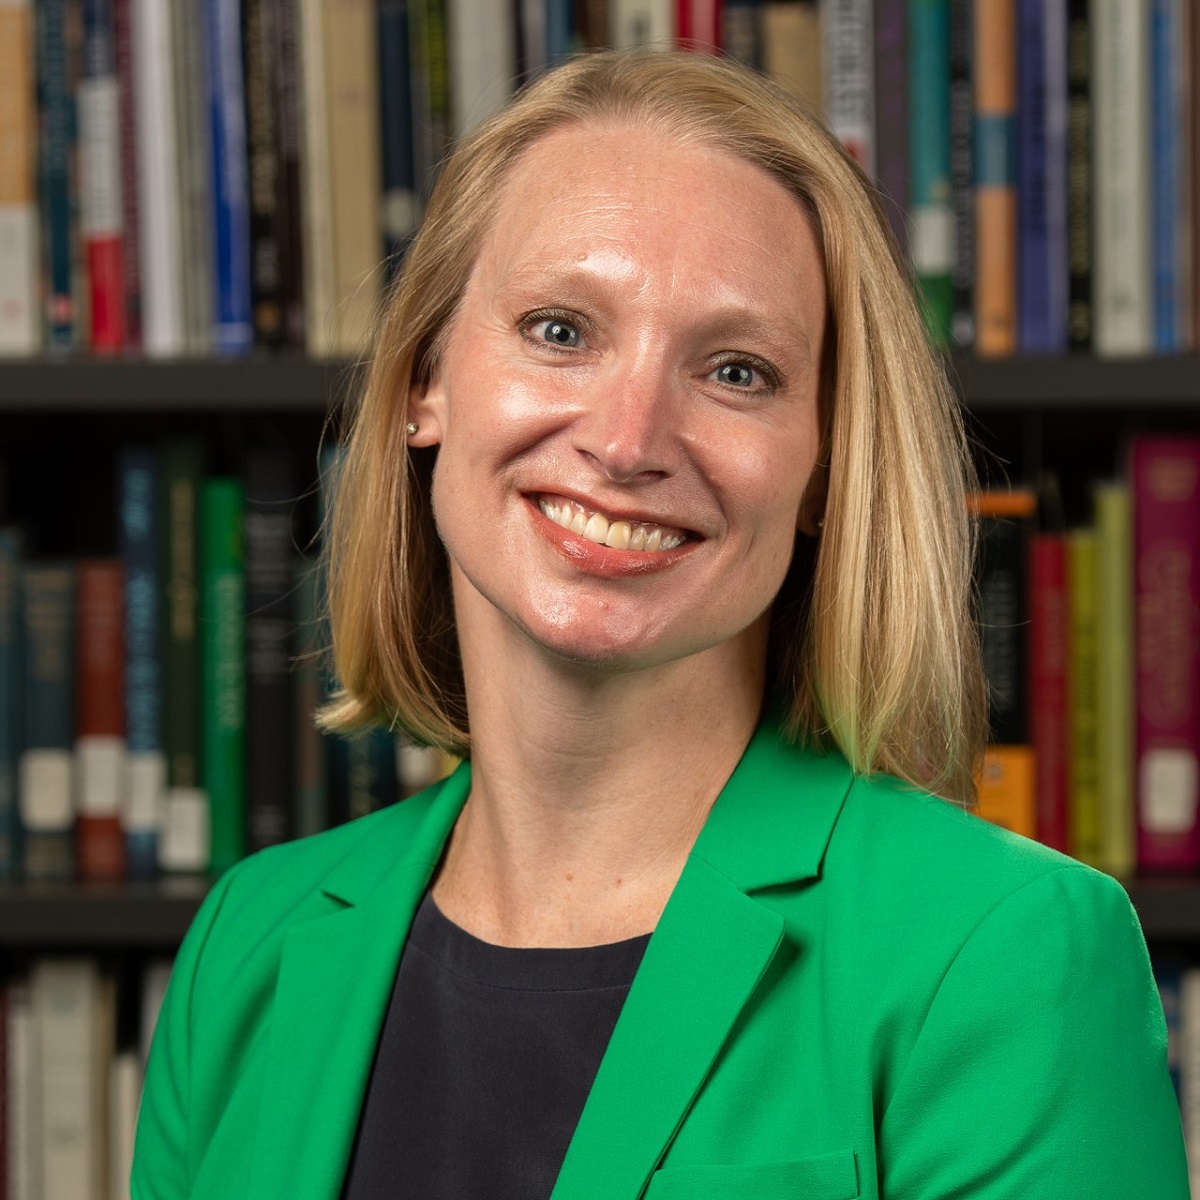 Professor Reaves Publishes Two Articles on Early Christianity